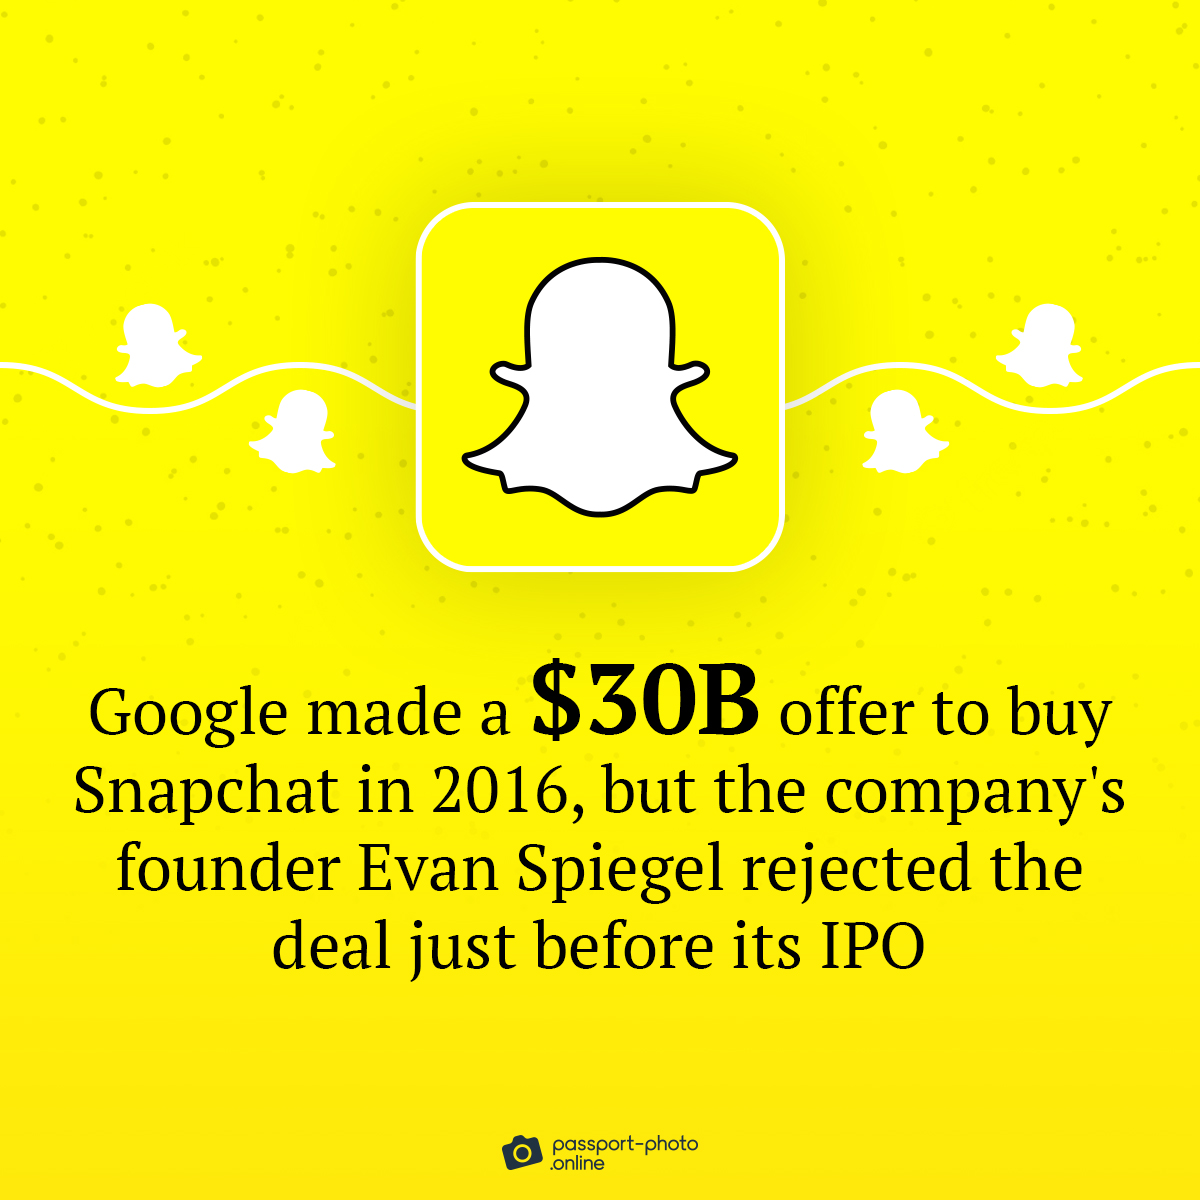 google tried to buy snapchat for $30B